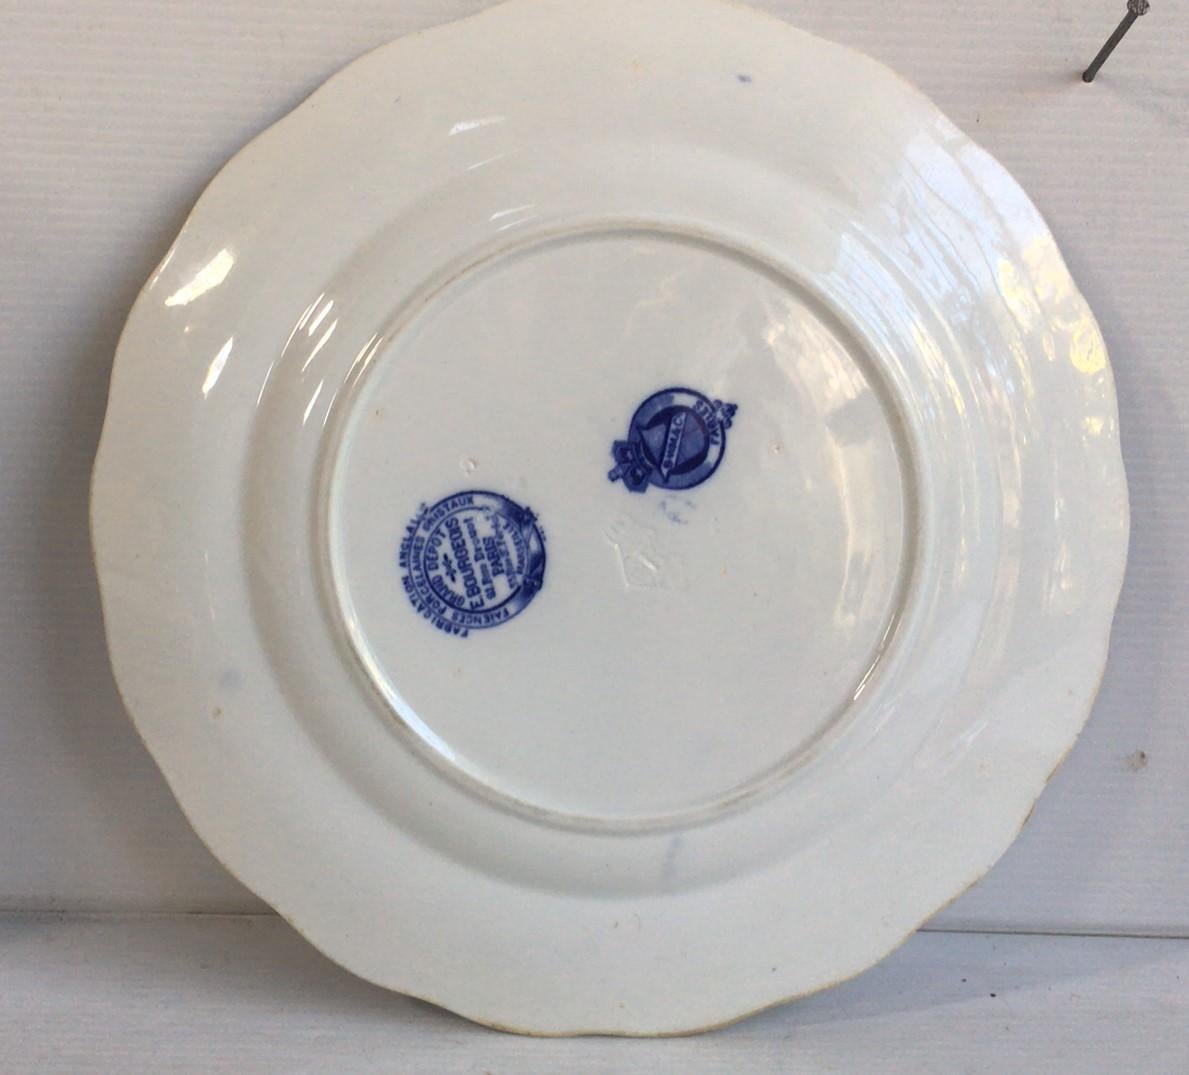 English blue and white plate heron brown Westhead and Moore, circa 1890.
Was sold in the Grand Depot 21 rue Drouot Paris.
Fontaine / Aesops Fables
English Losange mark.